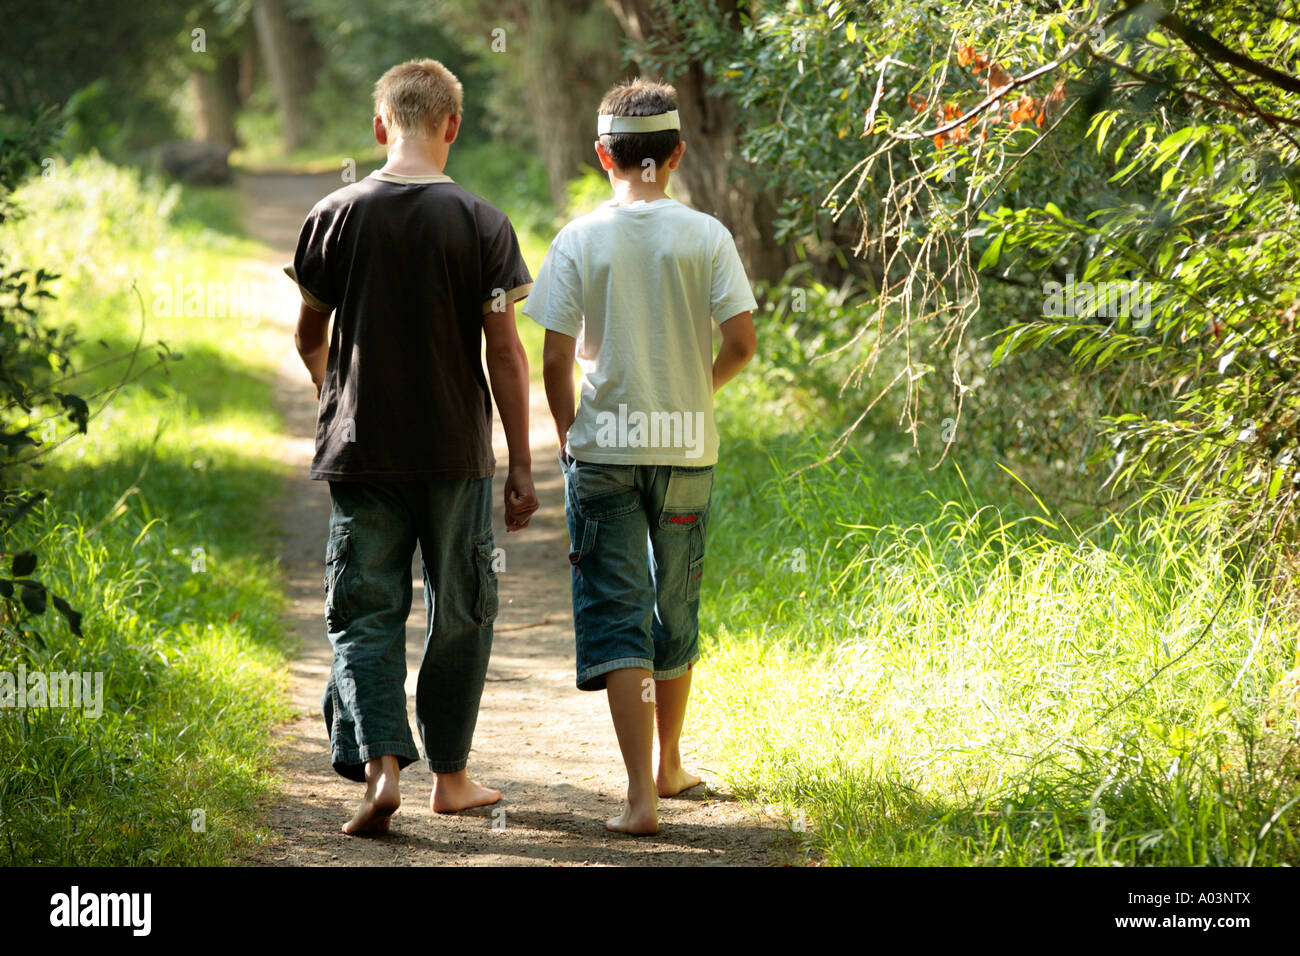 two young boys walking along a forest track in their bare feet Stock Photo  - Alamy